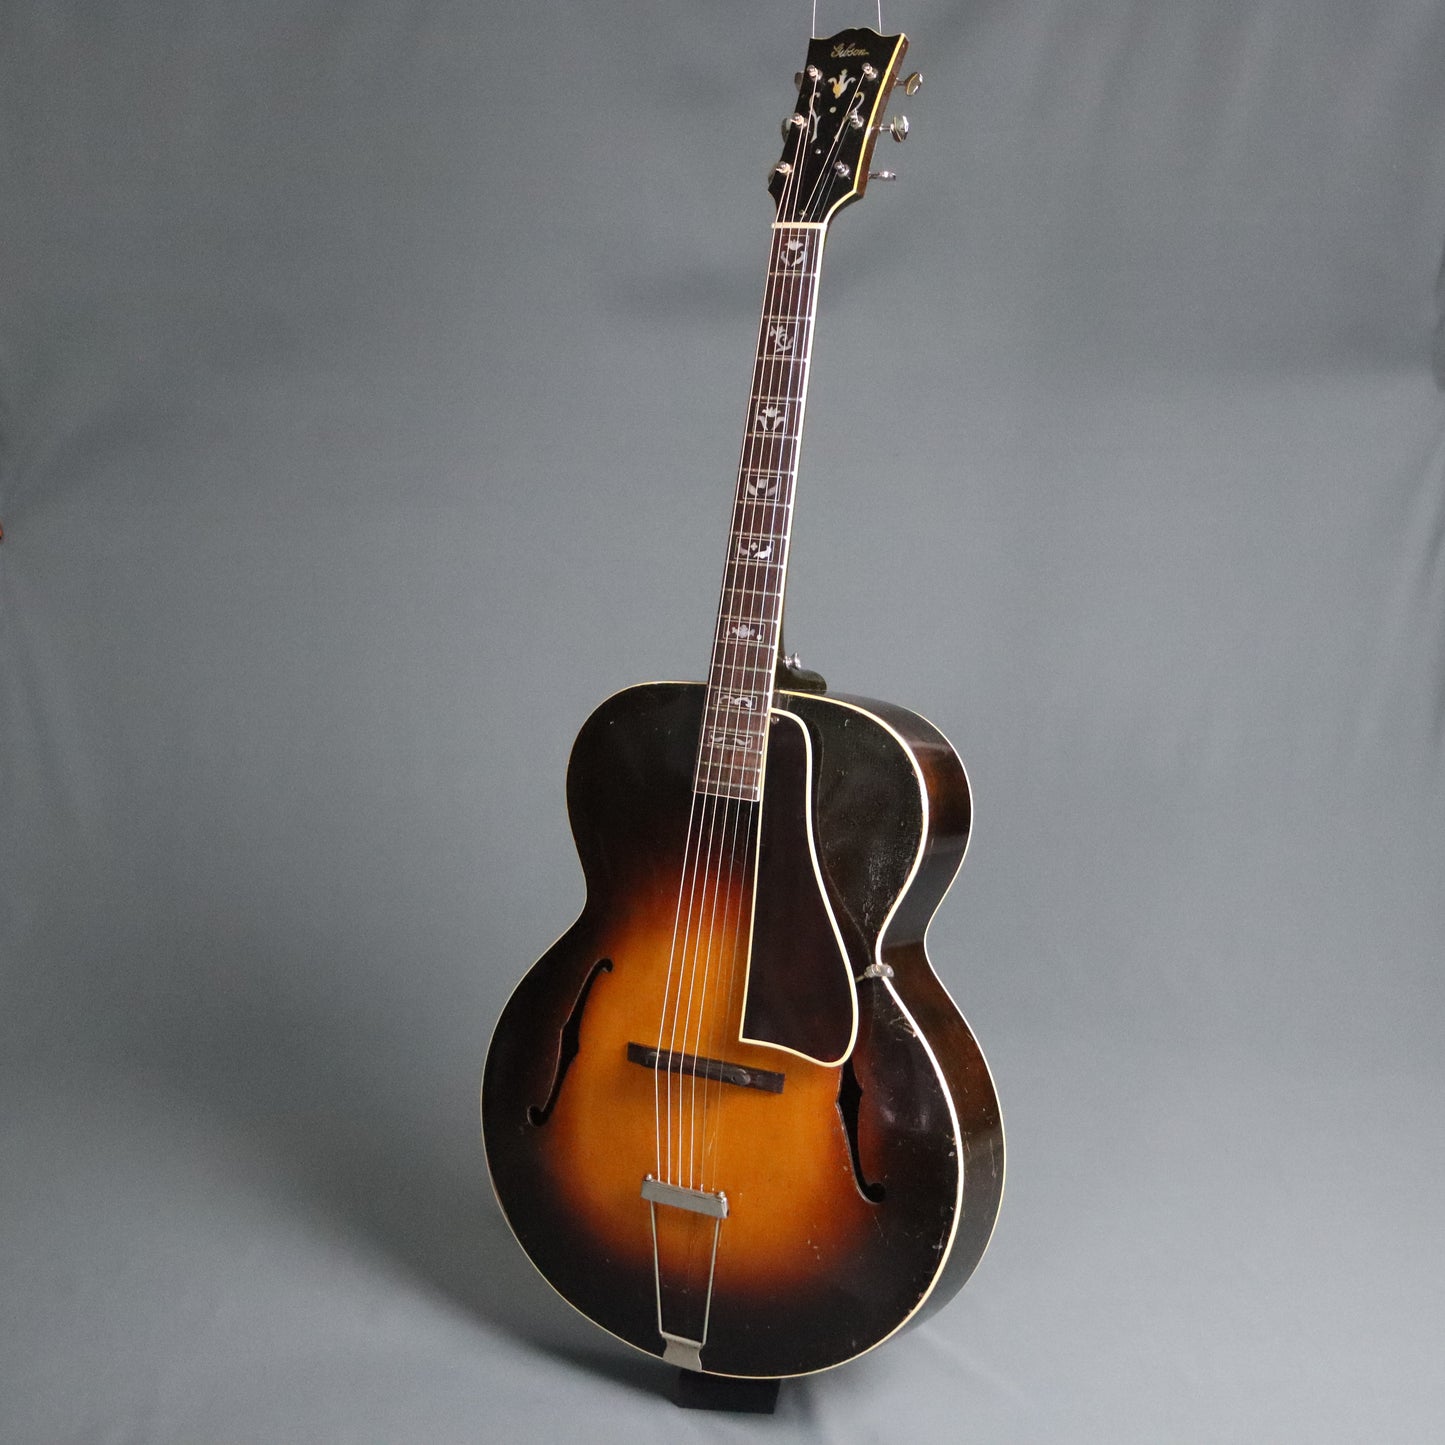 1936 Gibson L-7 Archtop Guitar w' FLAMED MAPLE L-5 Neck Advanced 17" Picture Frame L7 Arch Top